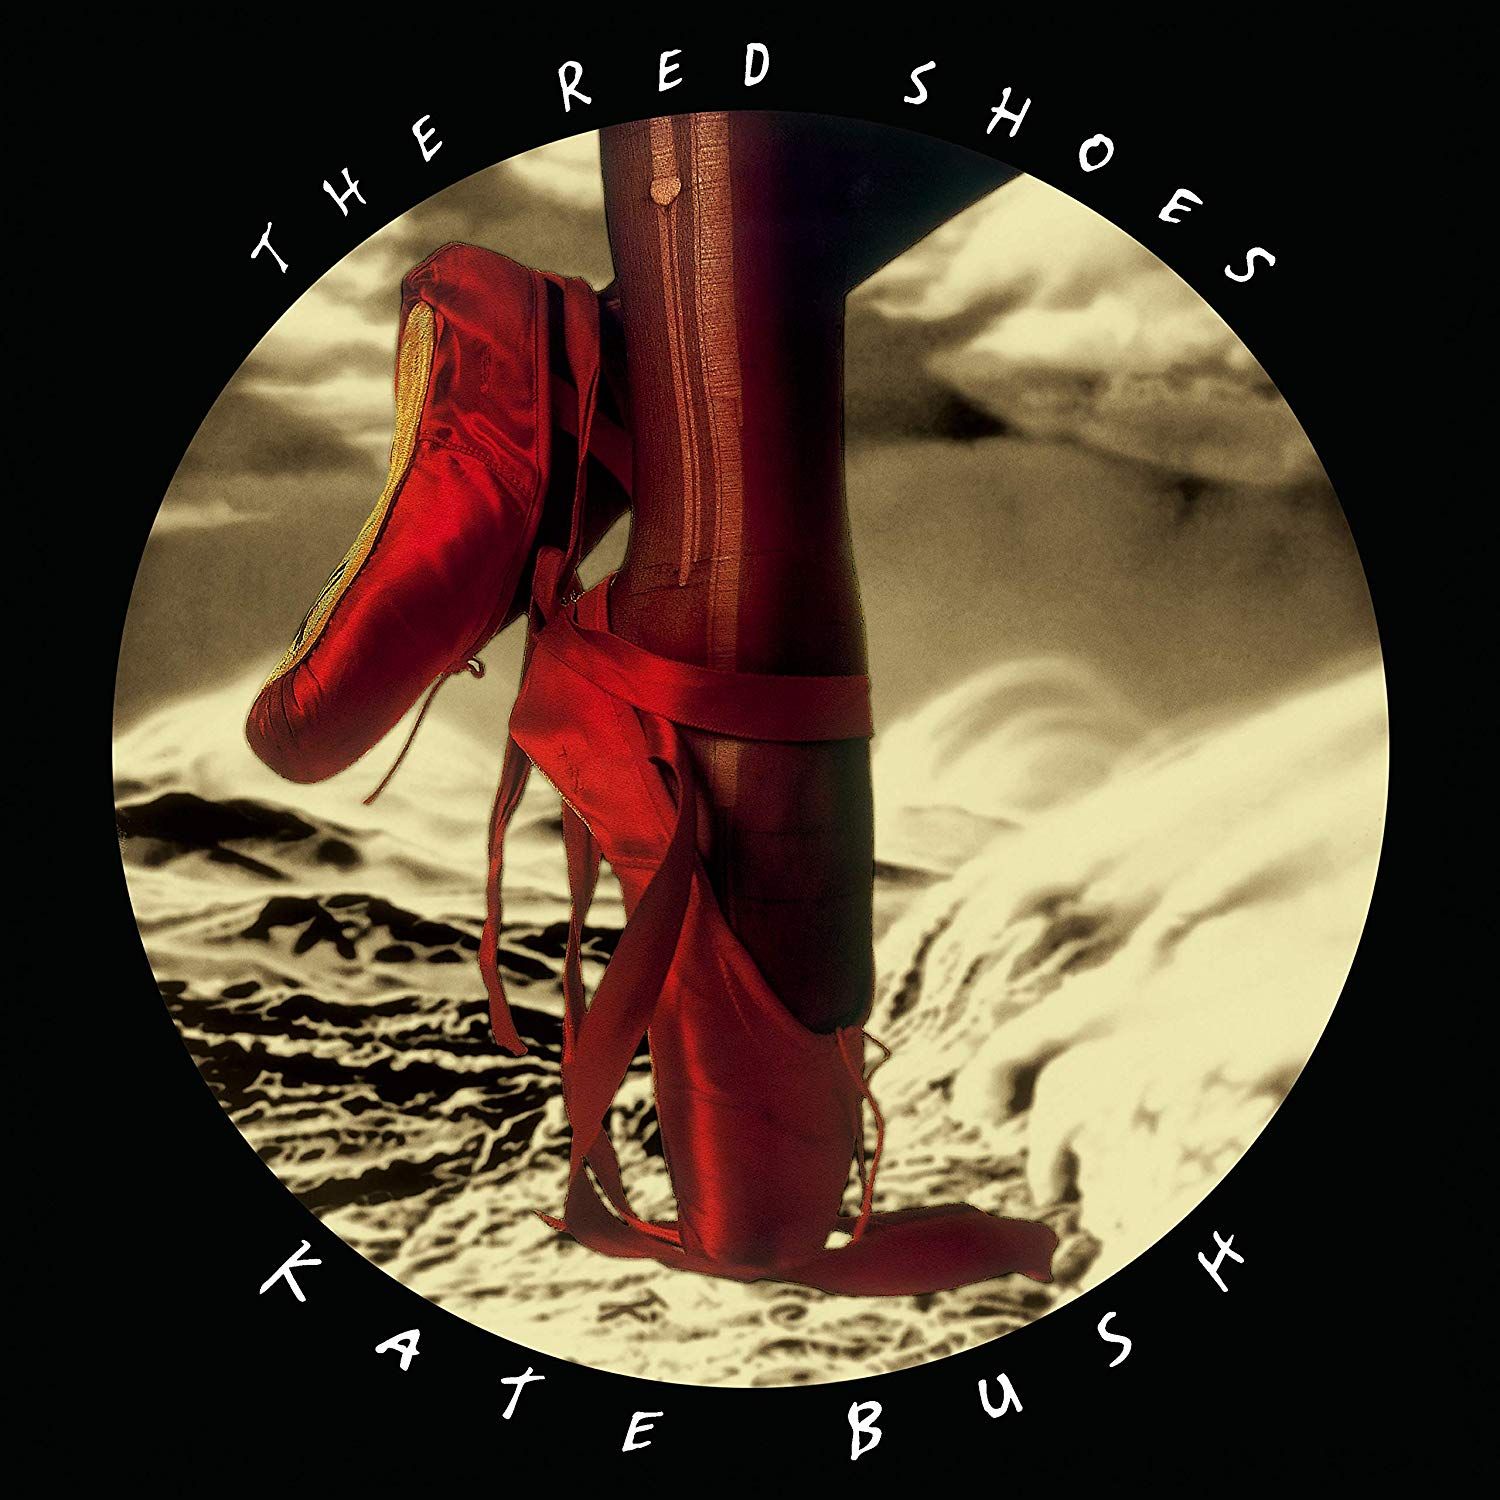 KATE BUSH / ケイト・ブッシュ / THE RED SHOES (2018 REMASTER)